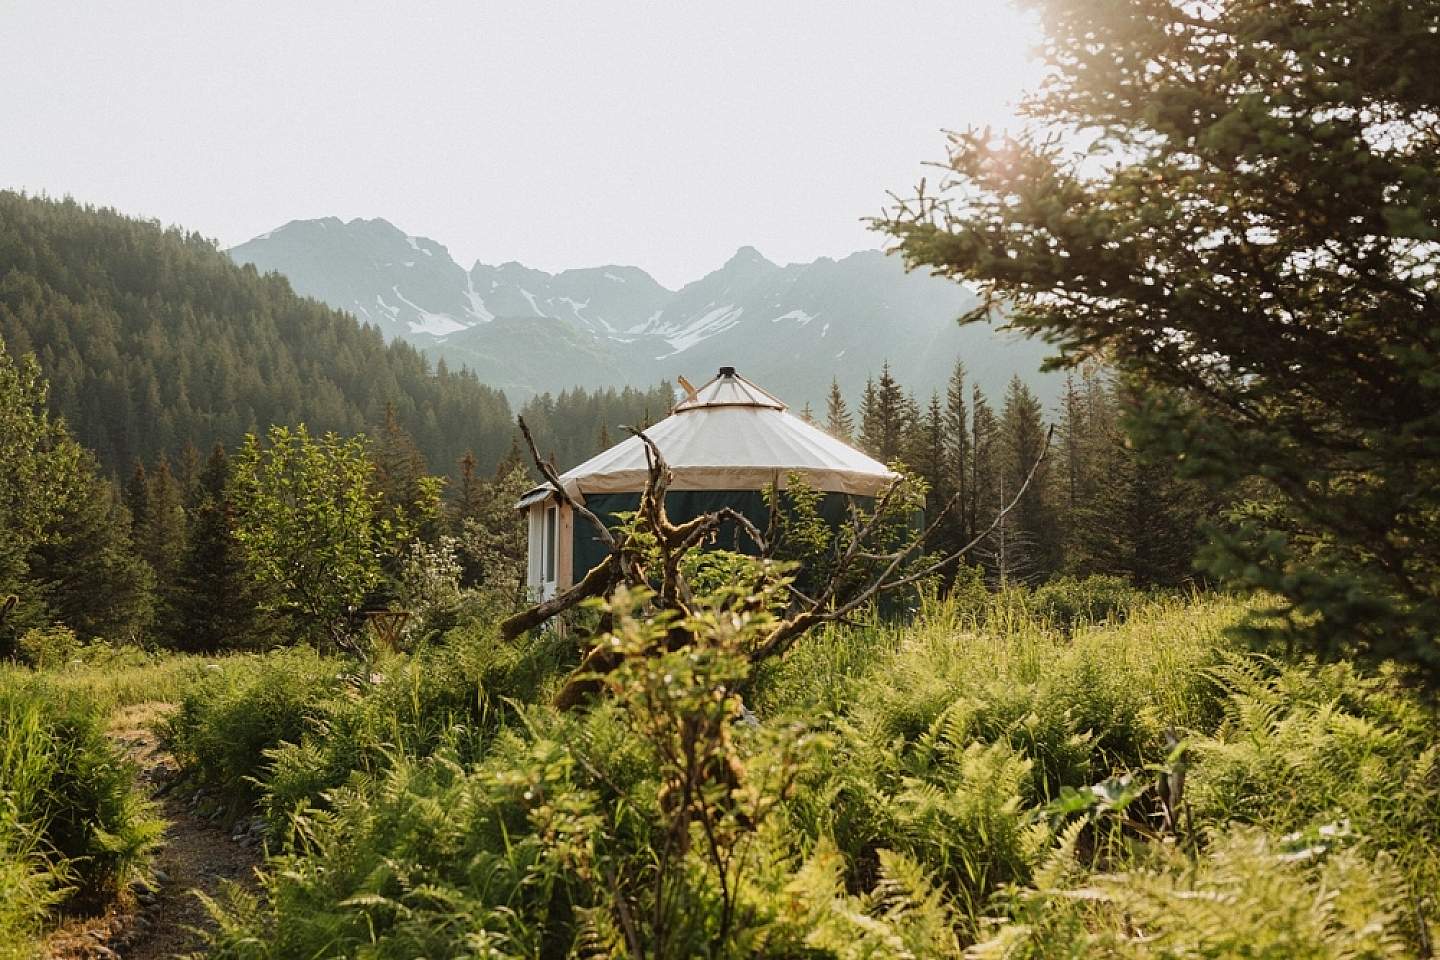 Stay the night by glamping in a yurt at Bear Glacier